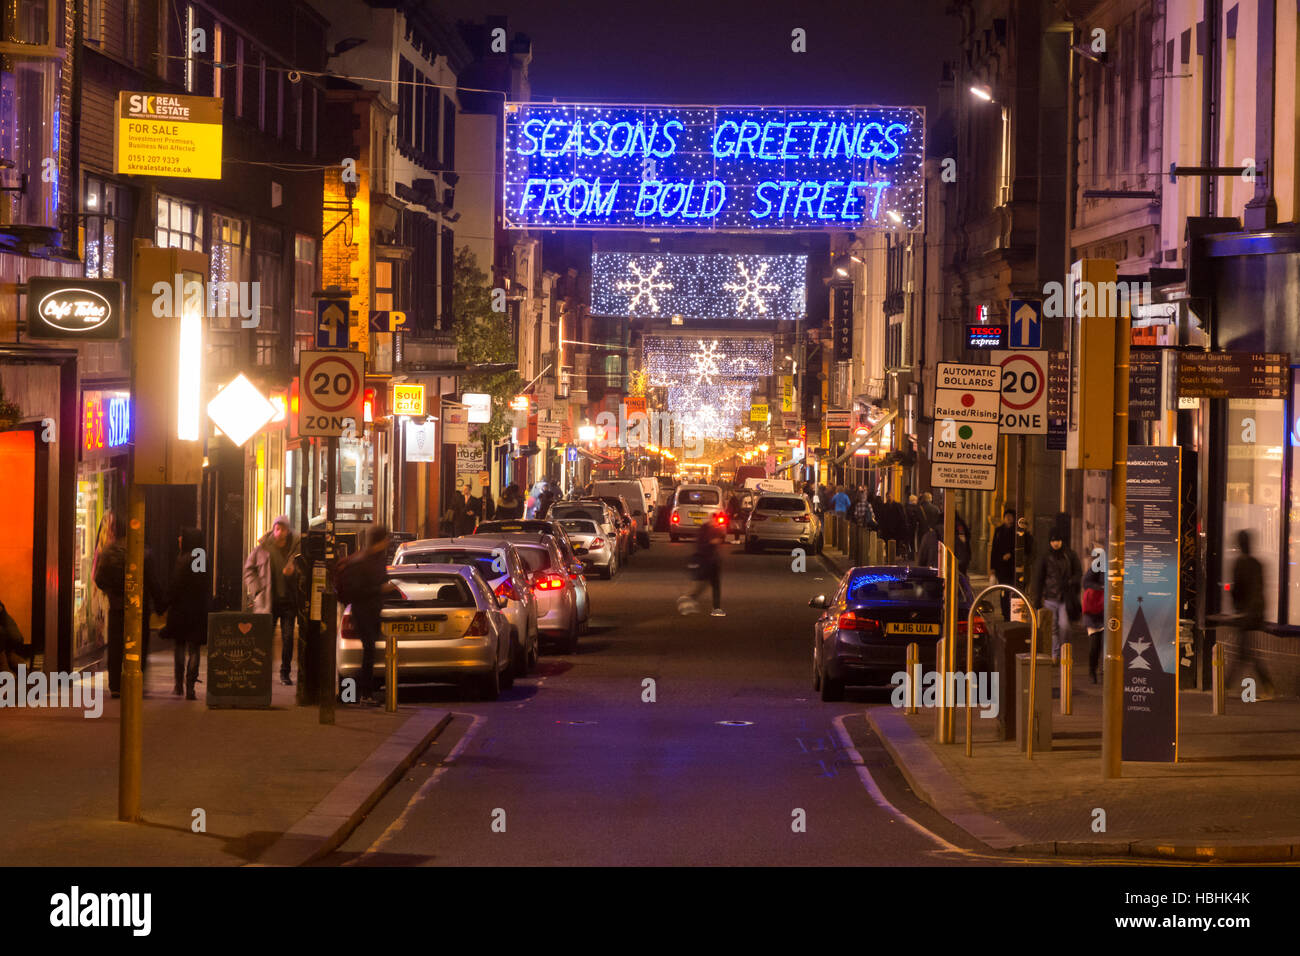 Liverpool At Night Stock Photos & Liverpool At Night Stock Images - Alamy